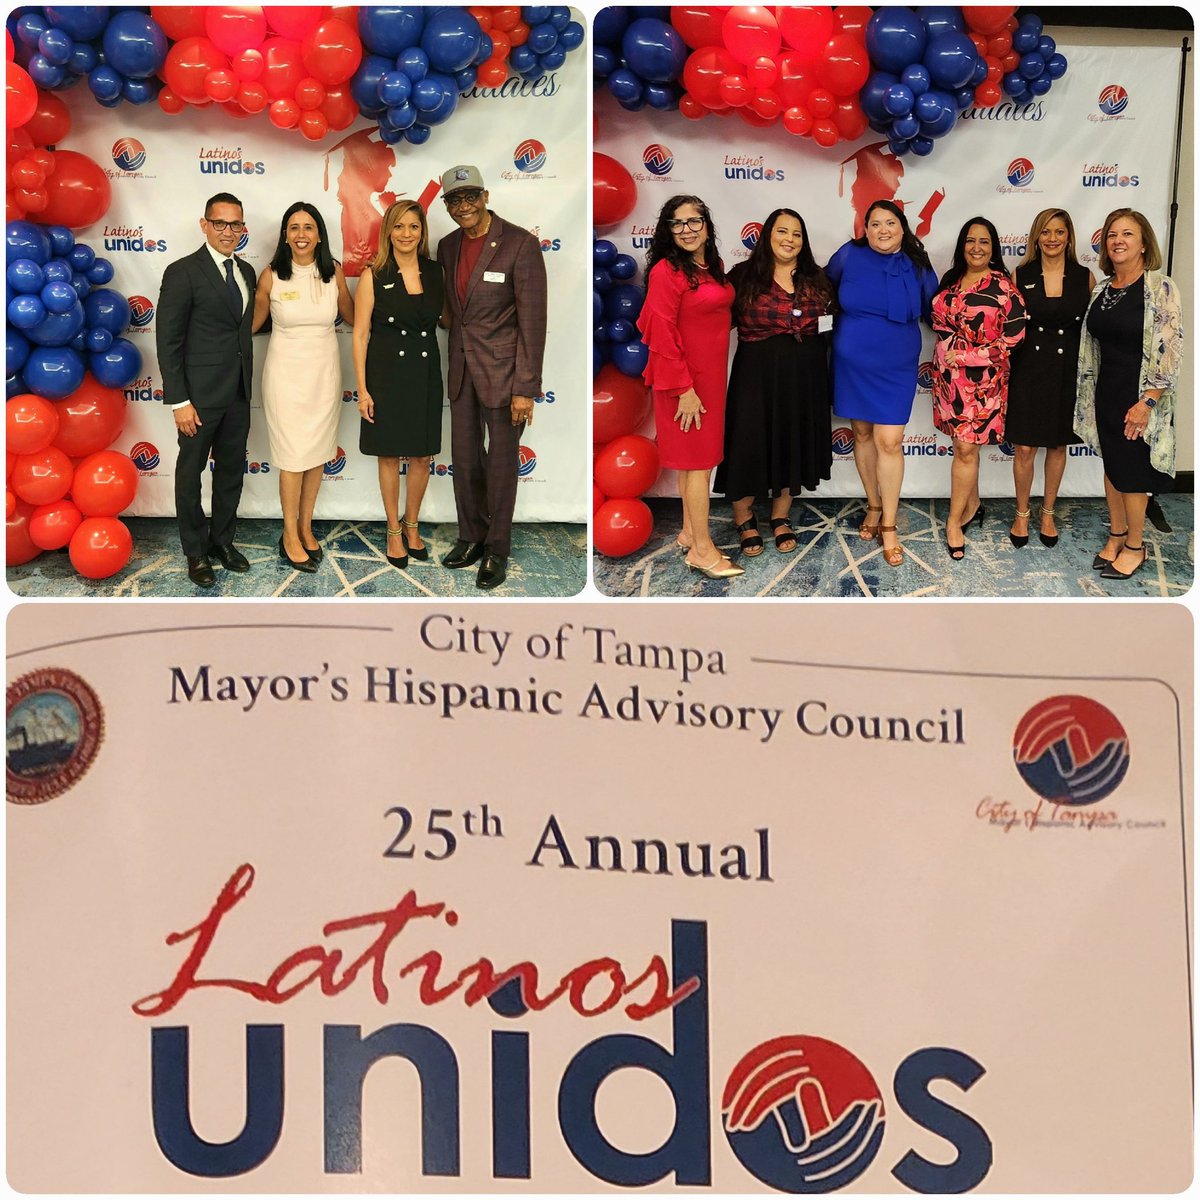 Delighted to represent @Florida_ALAS &celebrate 25yrs of unity &advocacy with the #LatinosUnidos Mayor's Hispanic Advisory Council for @CityofTampa! Congrats to their collaboration &progress for their vibrant Latino community. Gracias @Univision & @Jdelaprida7 for the invitation.